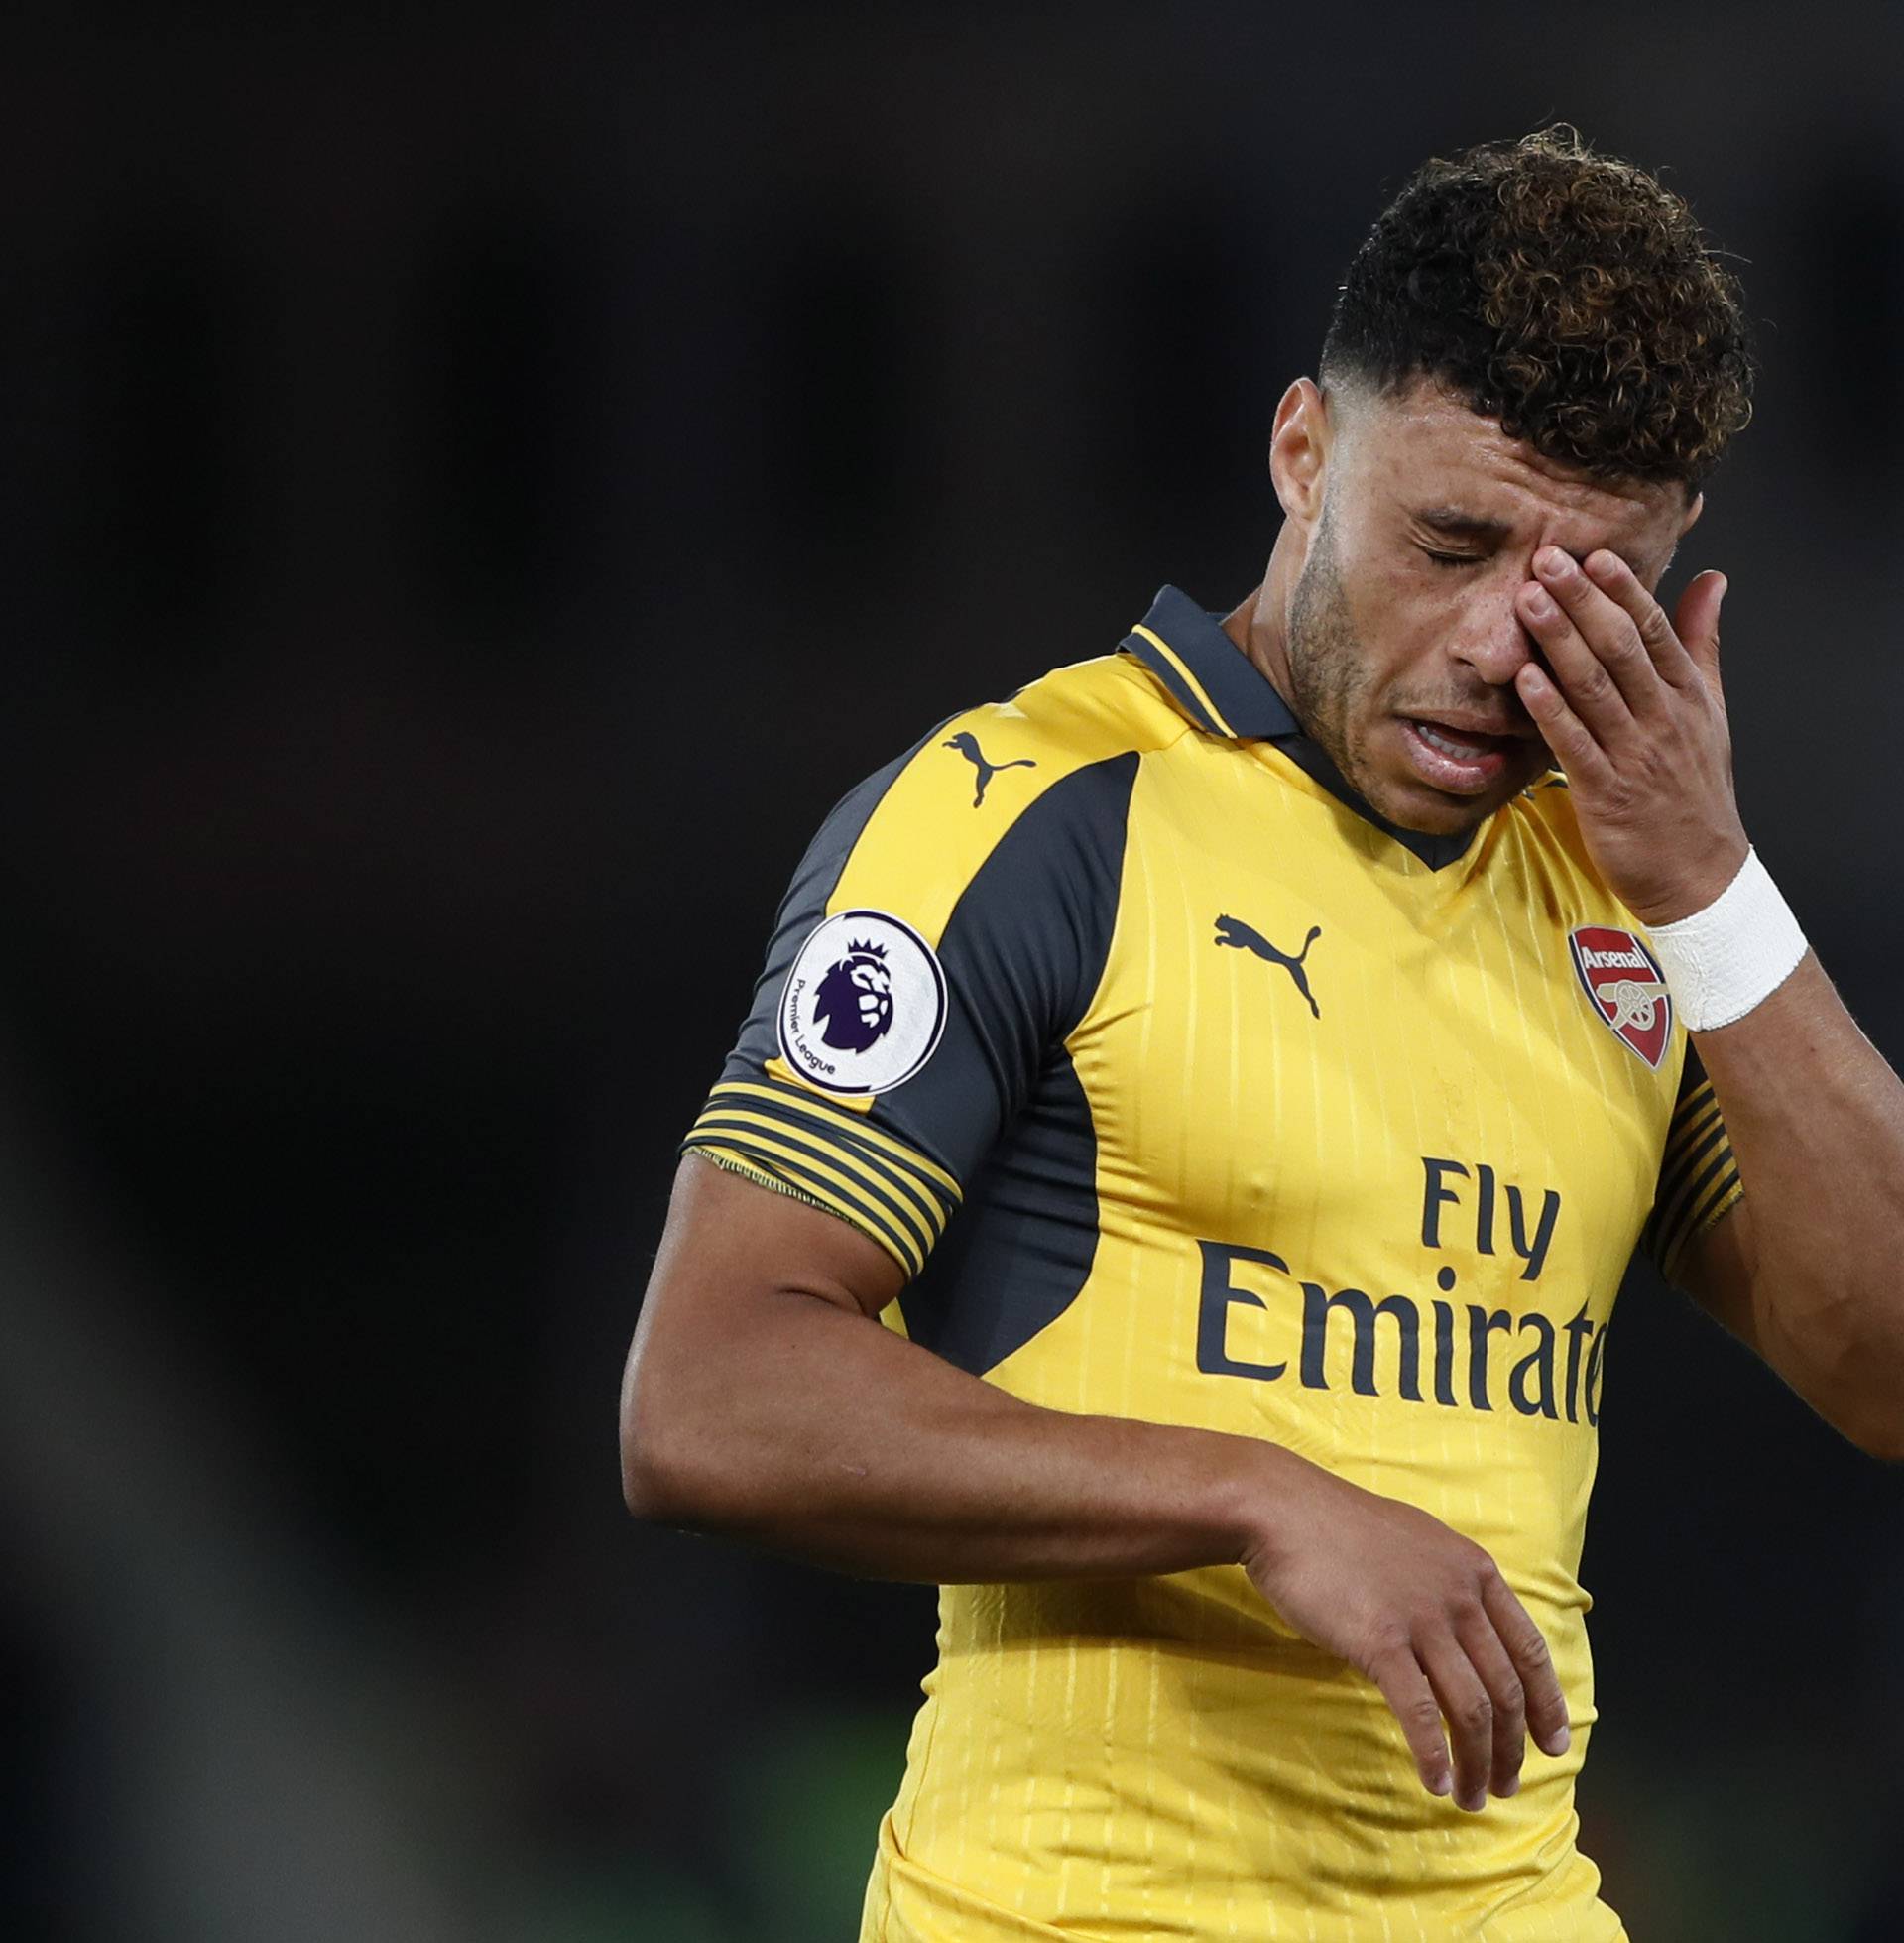 Arsenal's Alex Oxlade-Chamberlain looks dejected